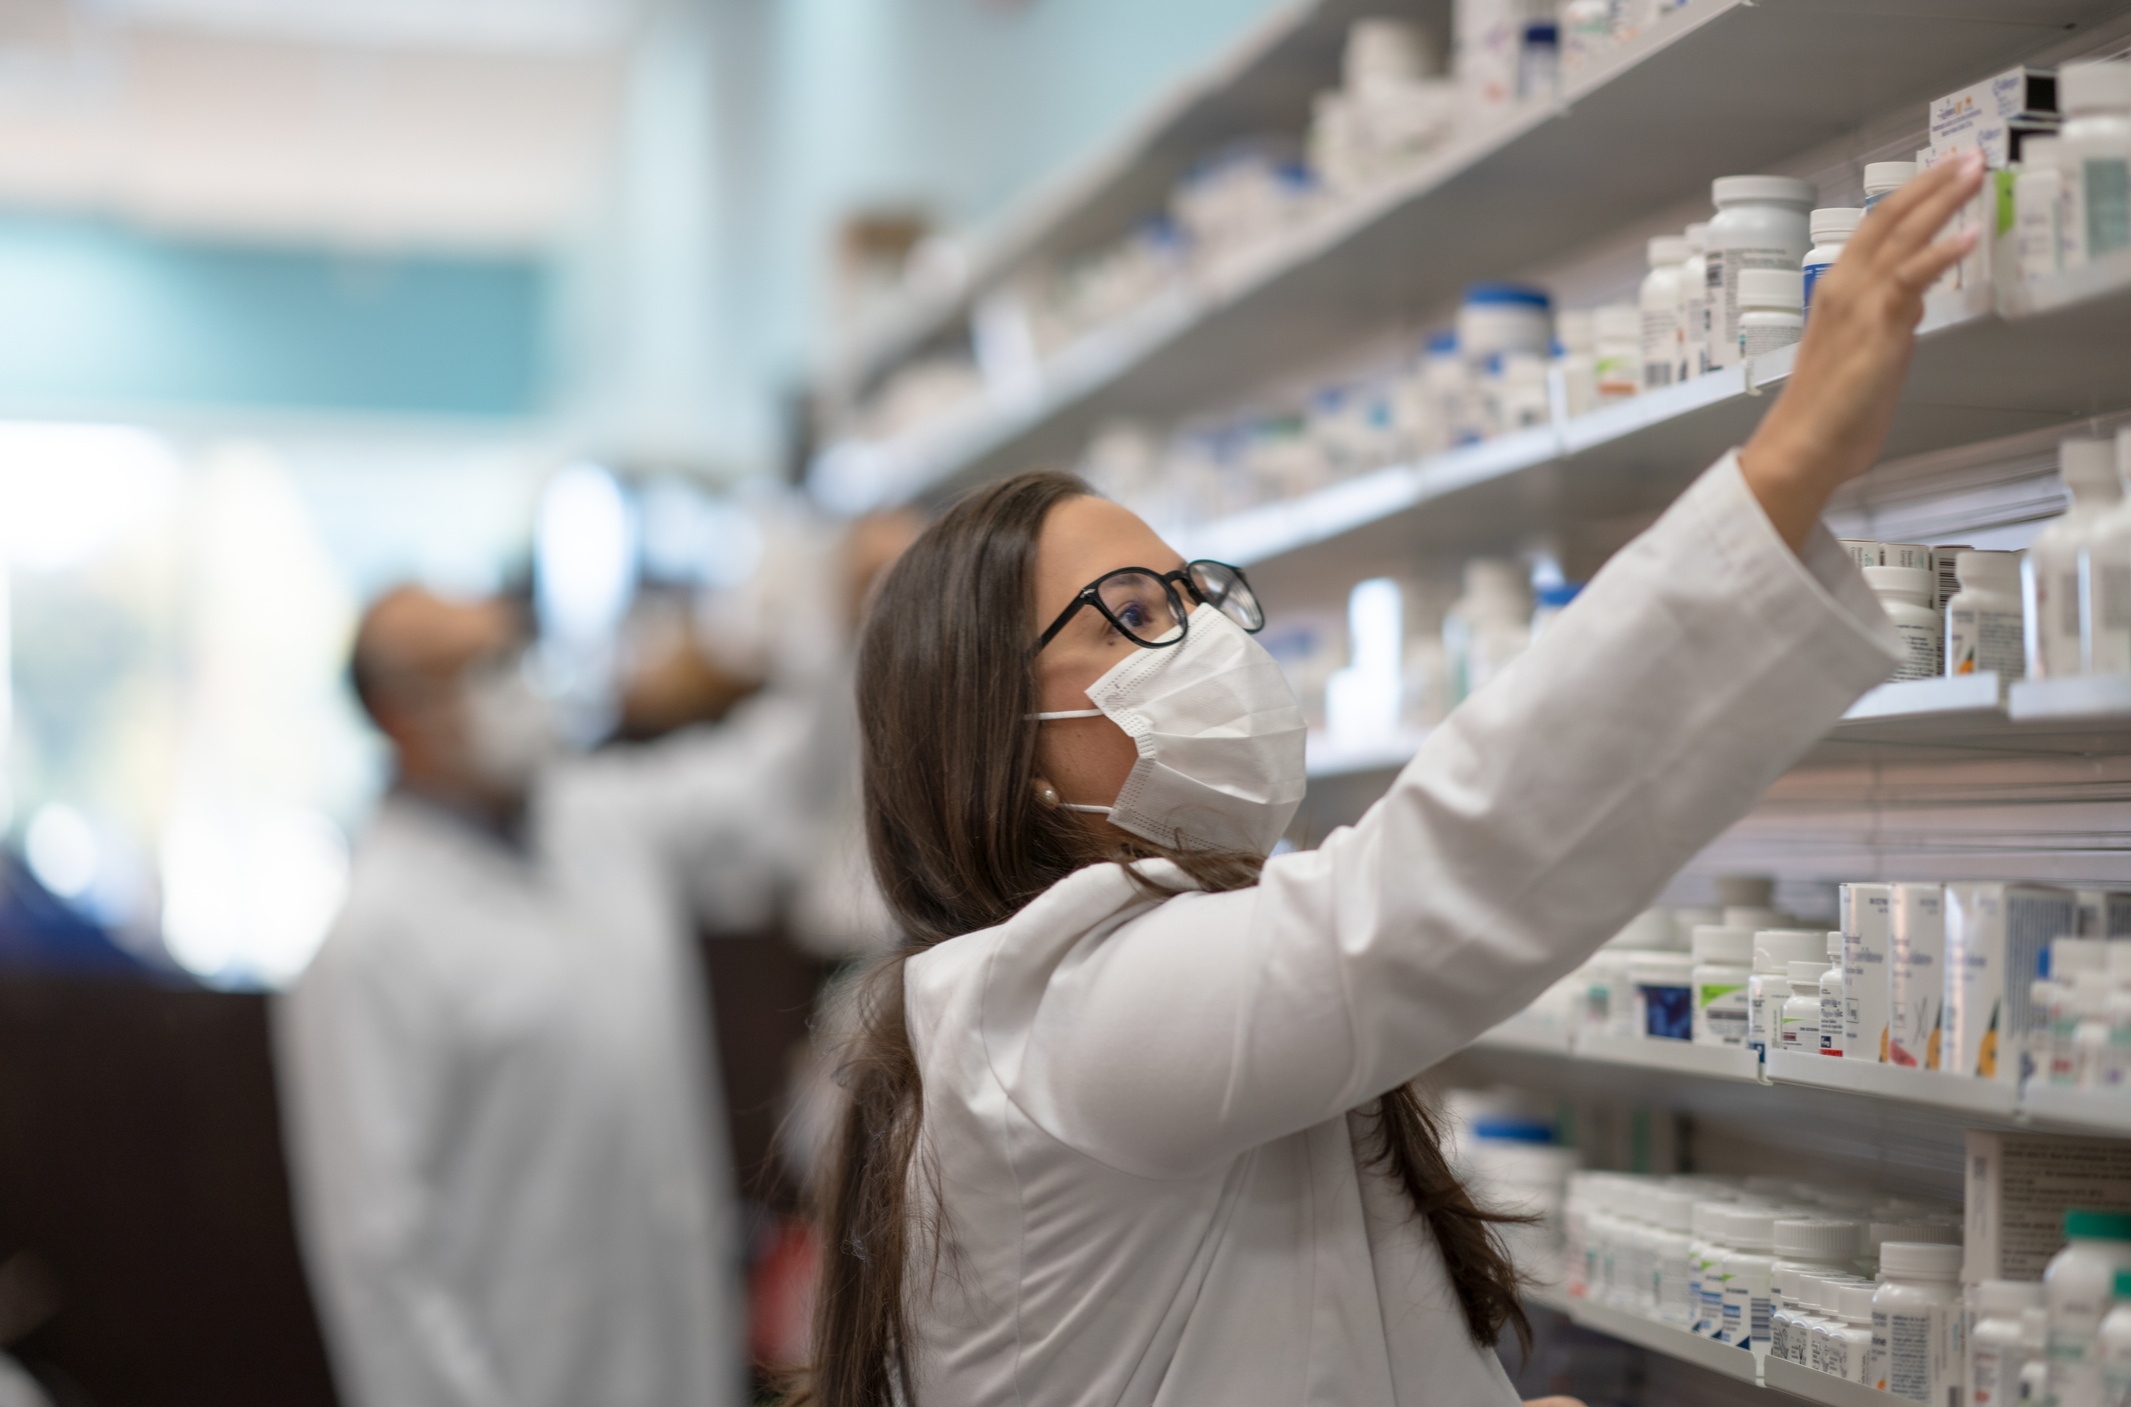 A Pharmacist with a mask on reaches for a bottle of medicine on a shelf above her head